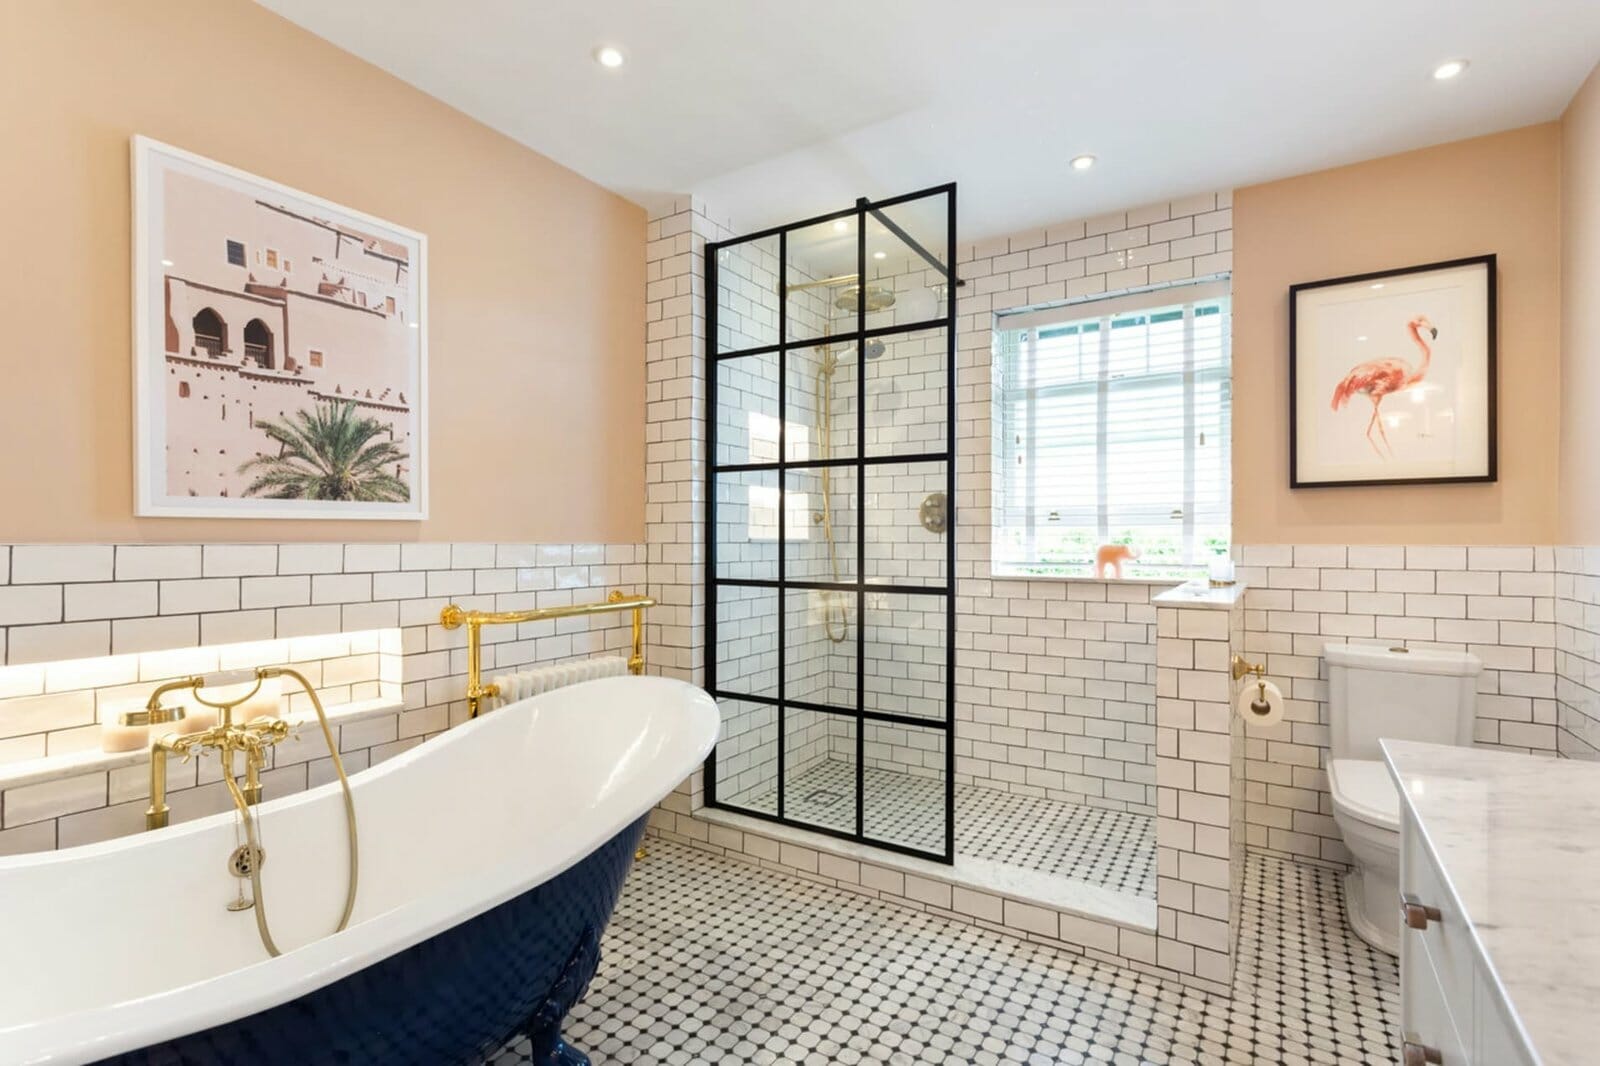 20 Bathroom Tile Ideas You'll Want to Steal - Decorilla